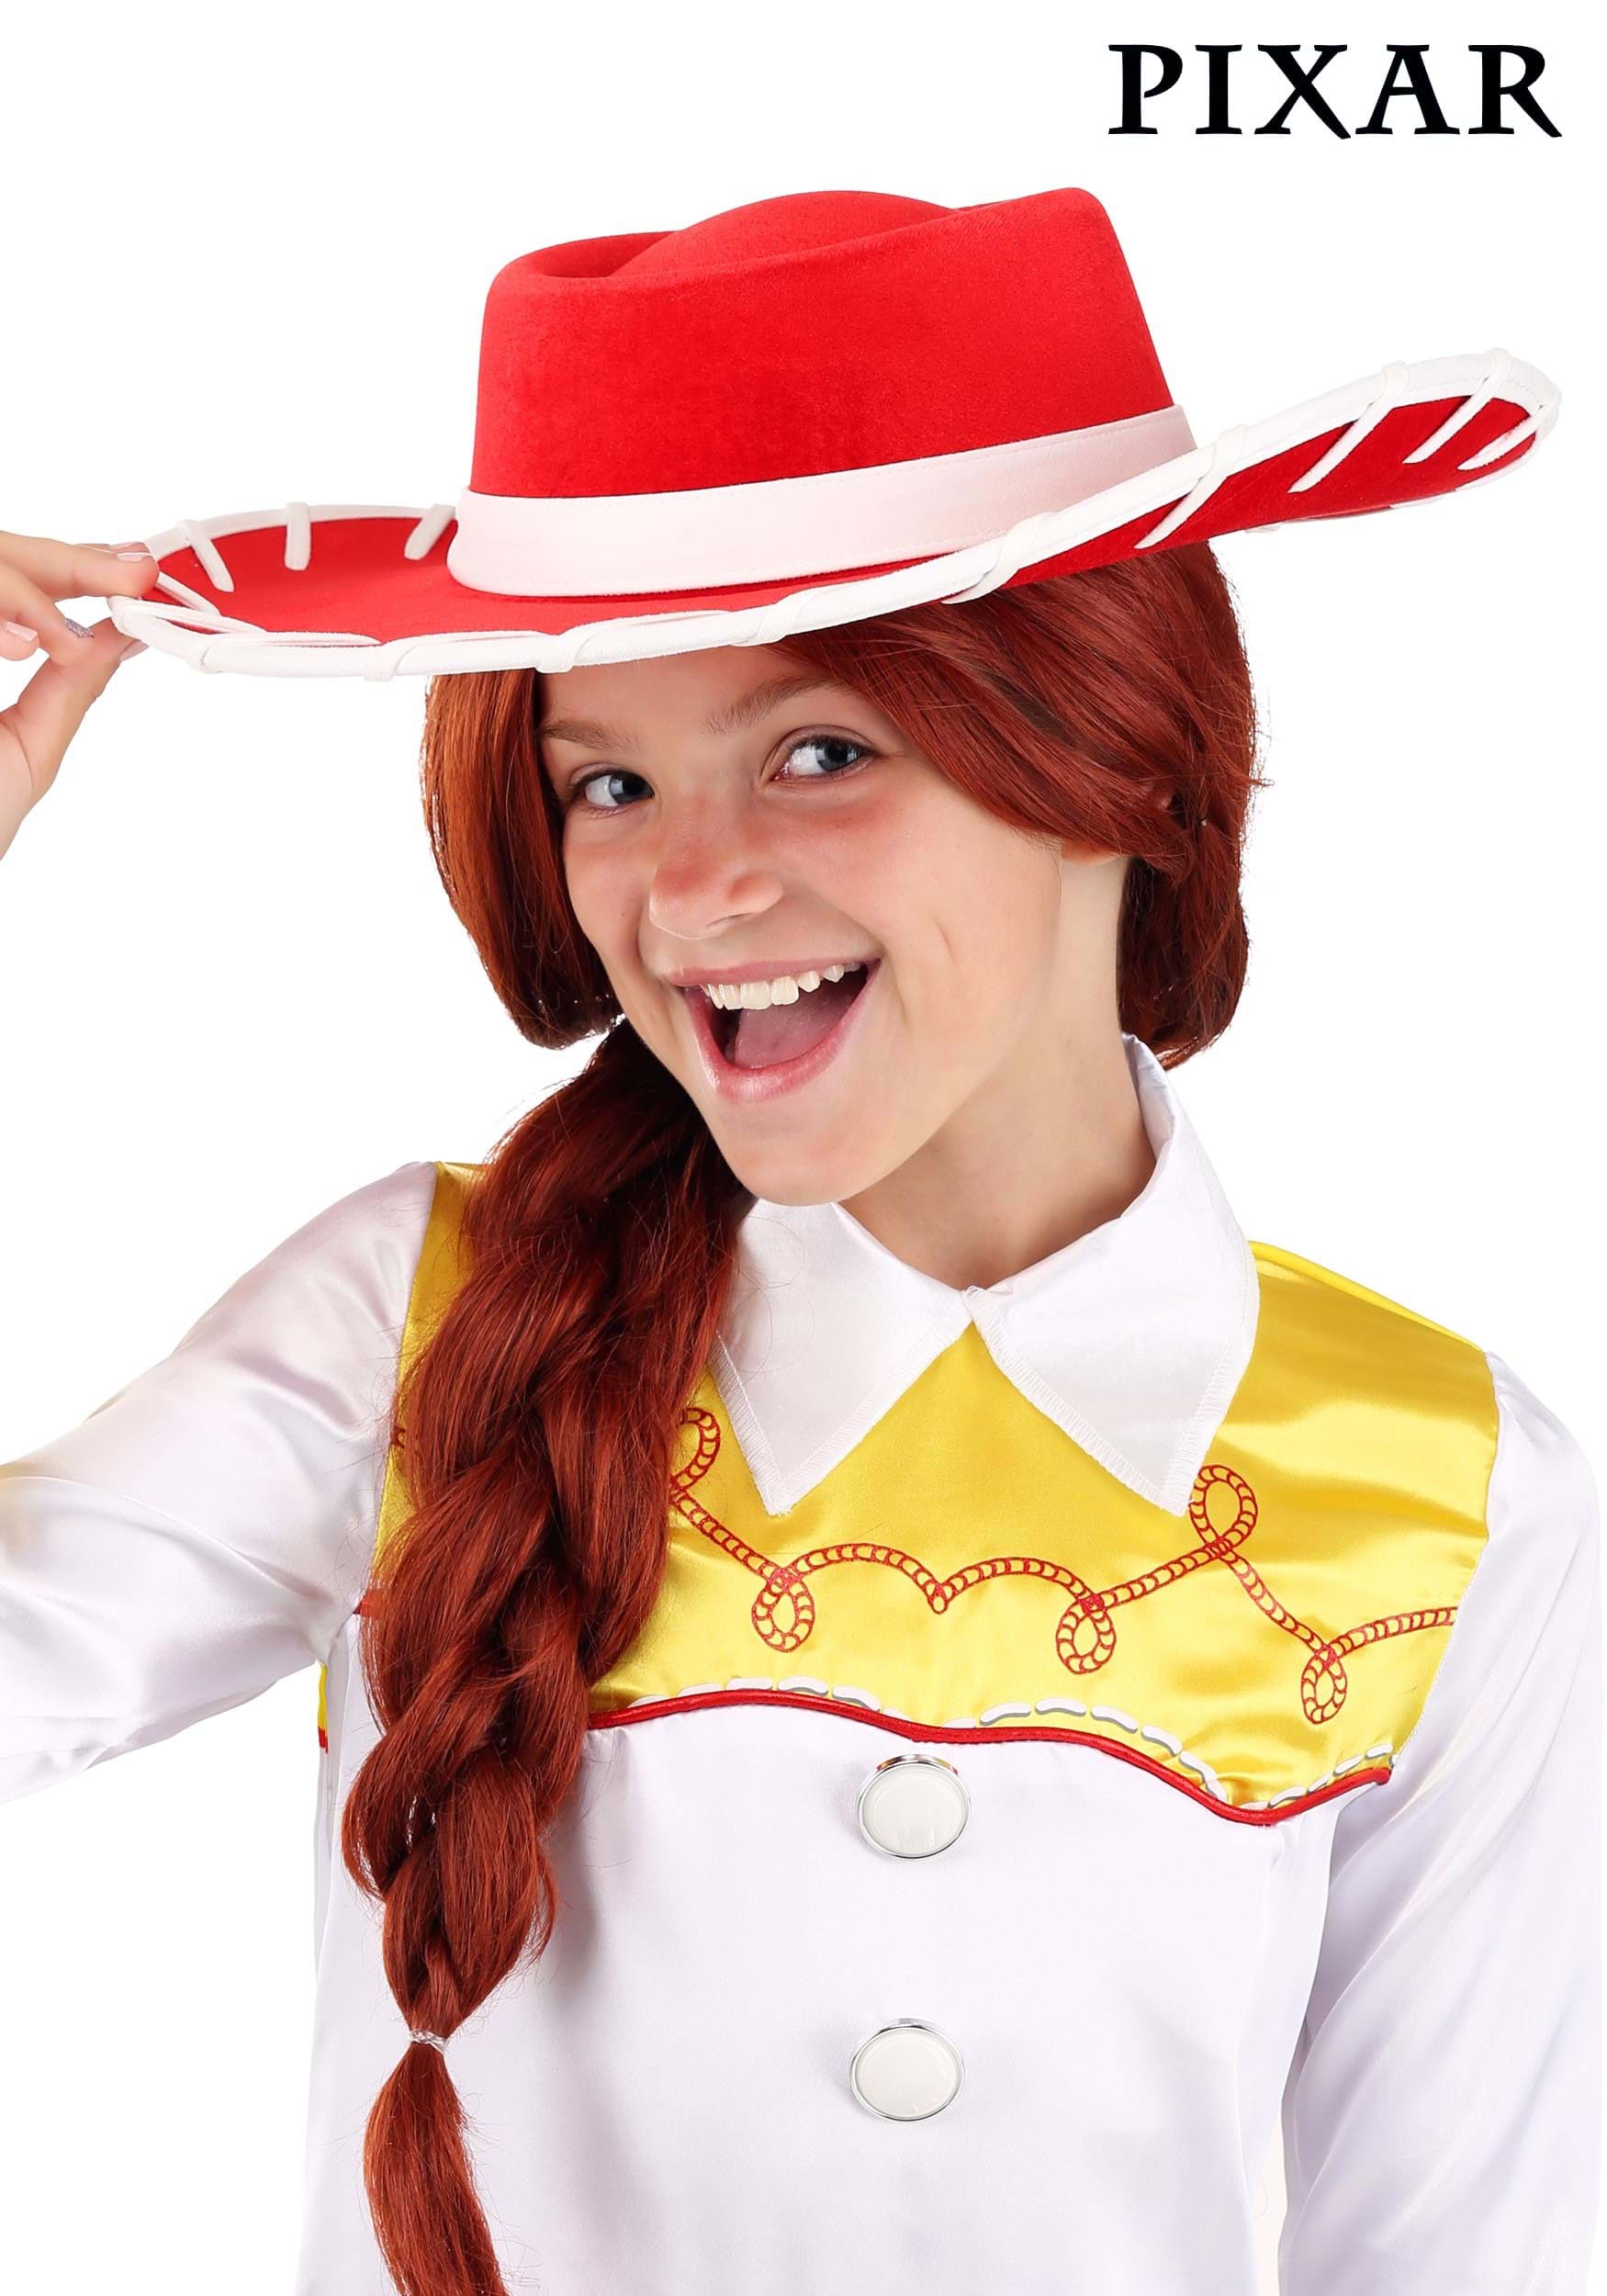 https://images.halloweencostumes.ca/products/18231/1-1/toy-story-jessie-hat-upd.jpg